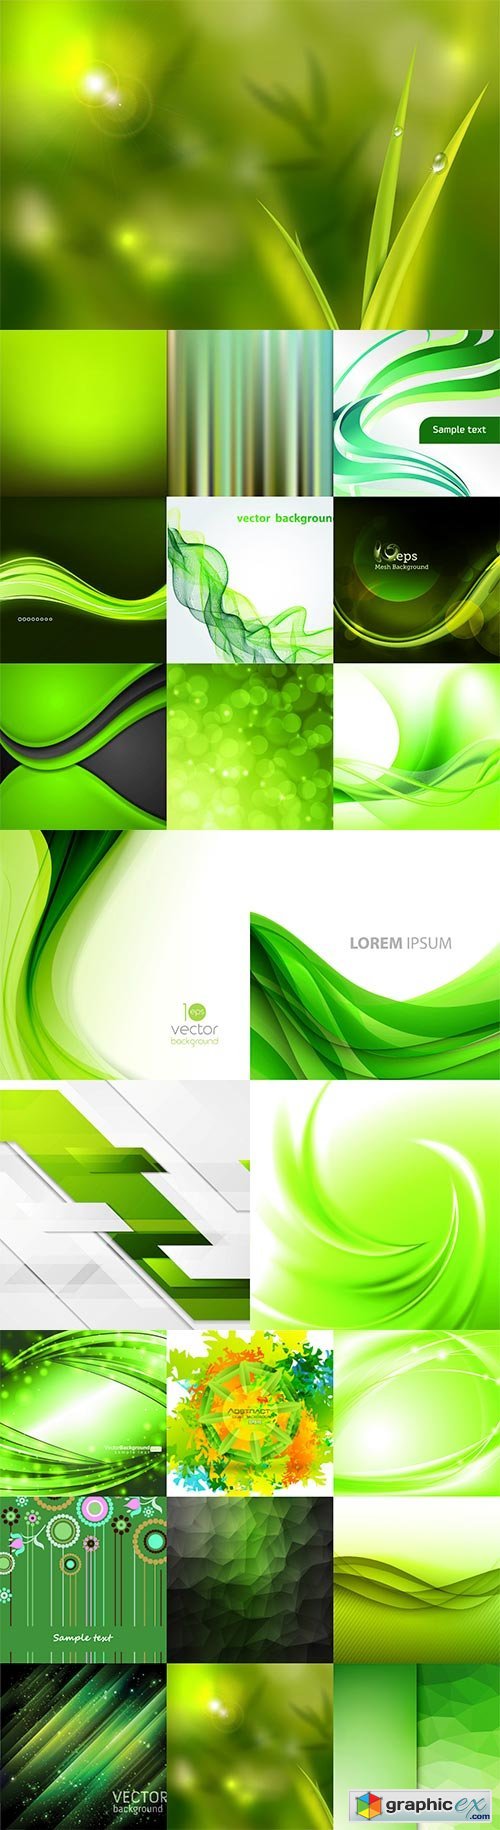 Green abstract vector backgrounds